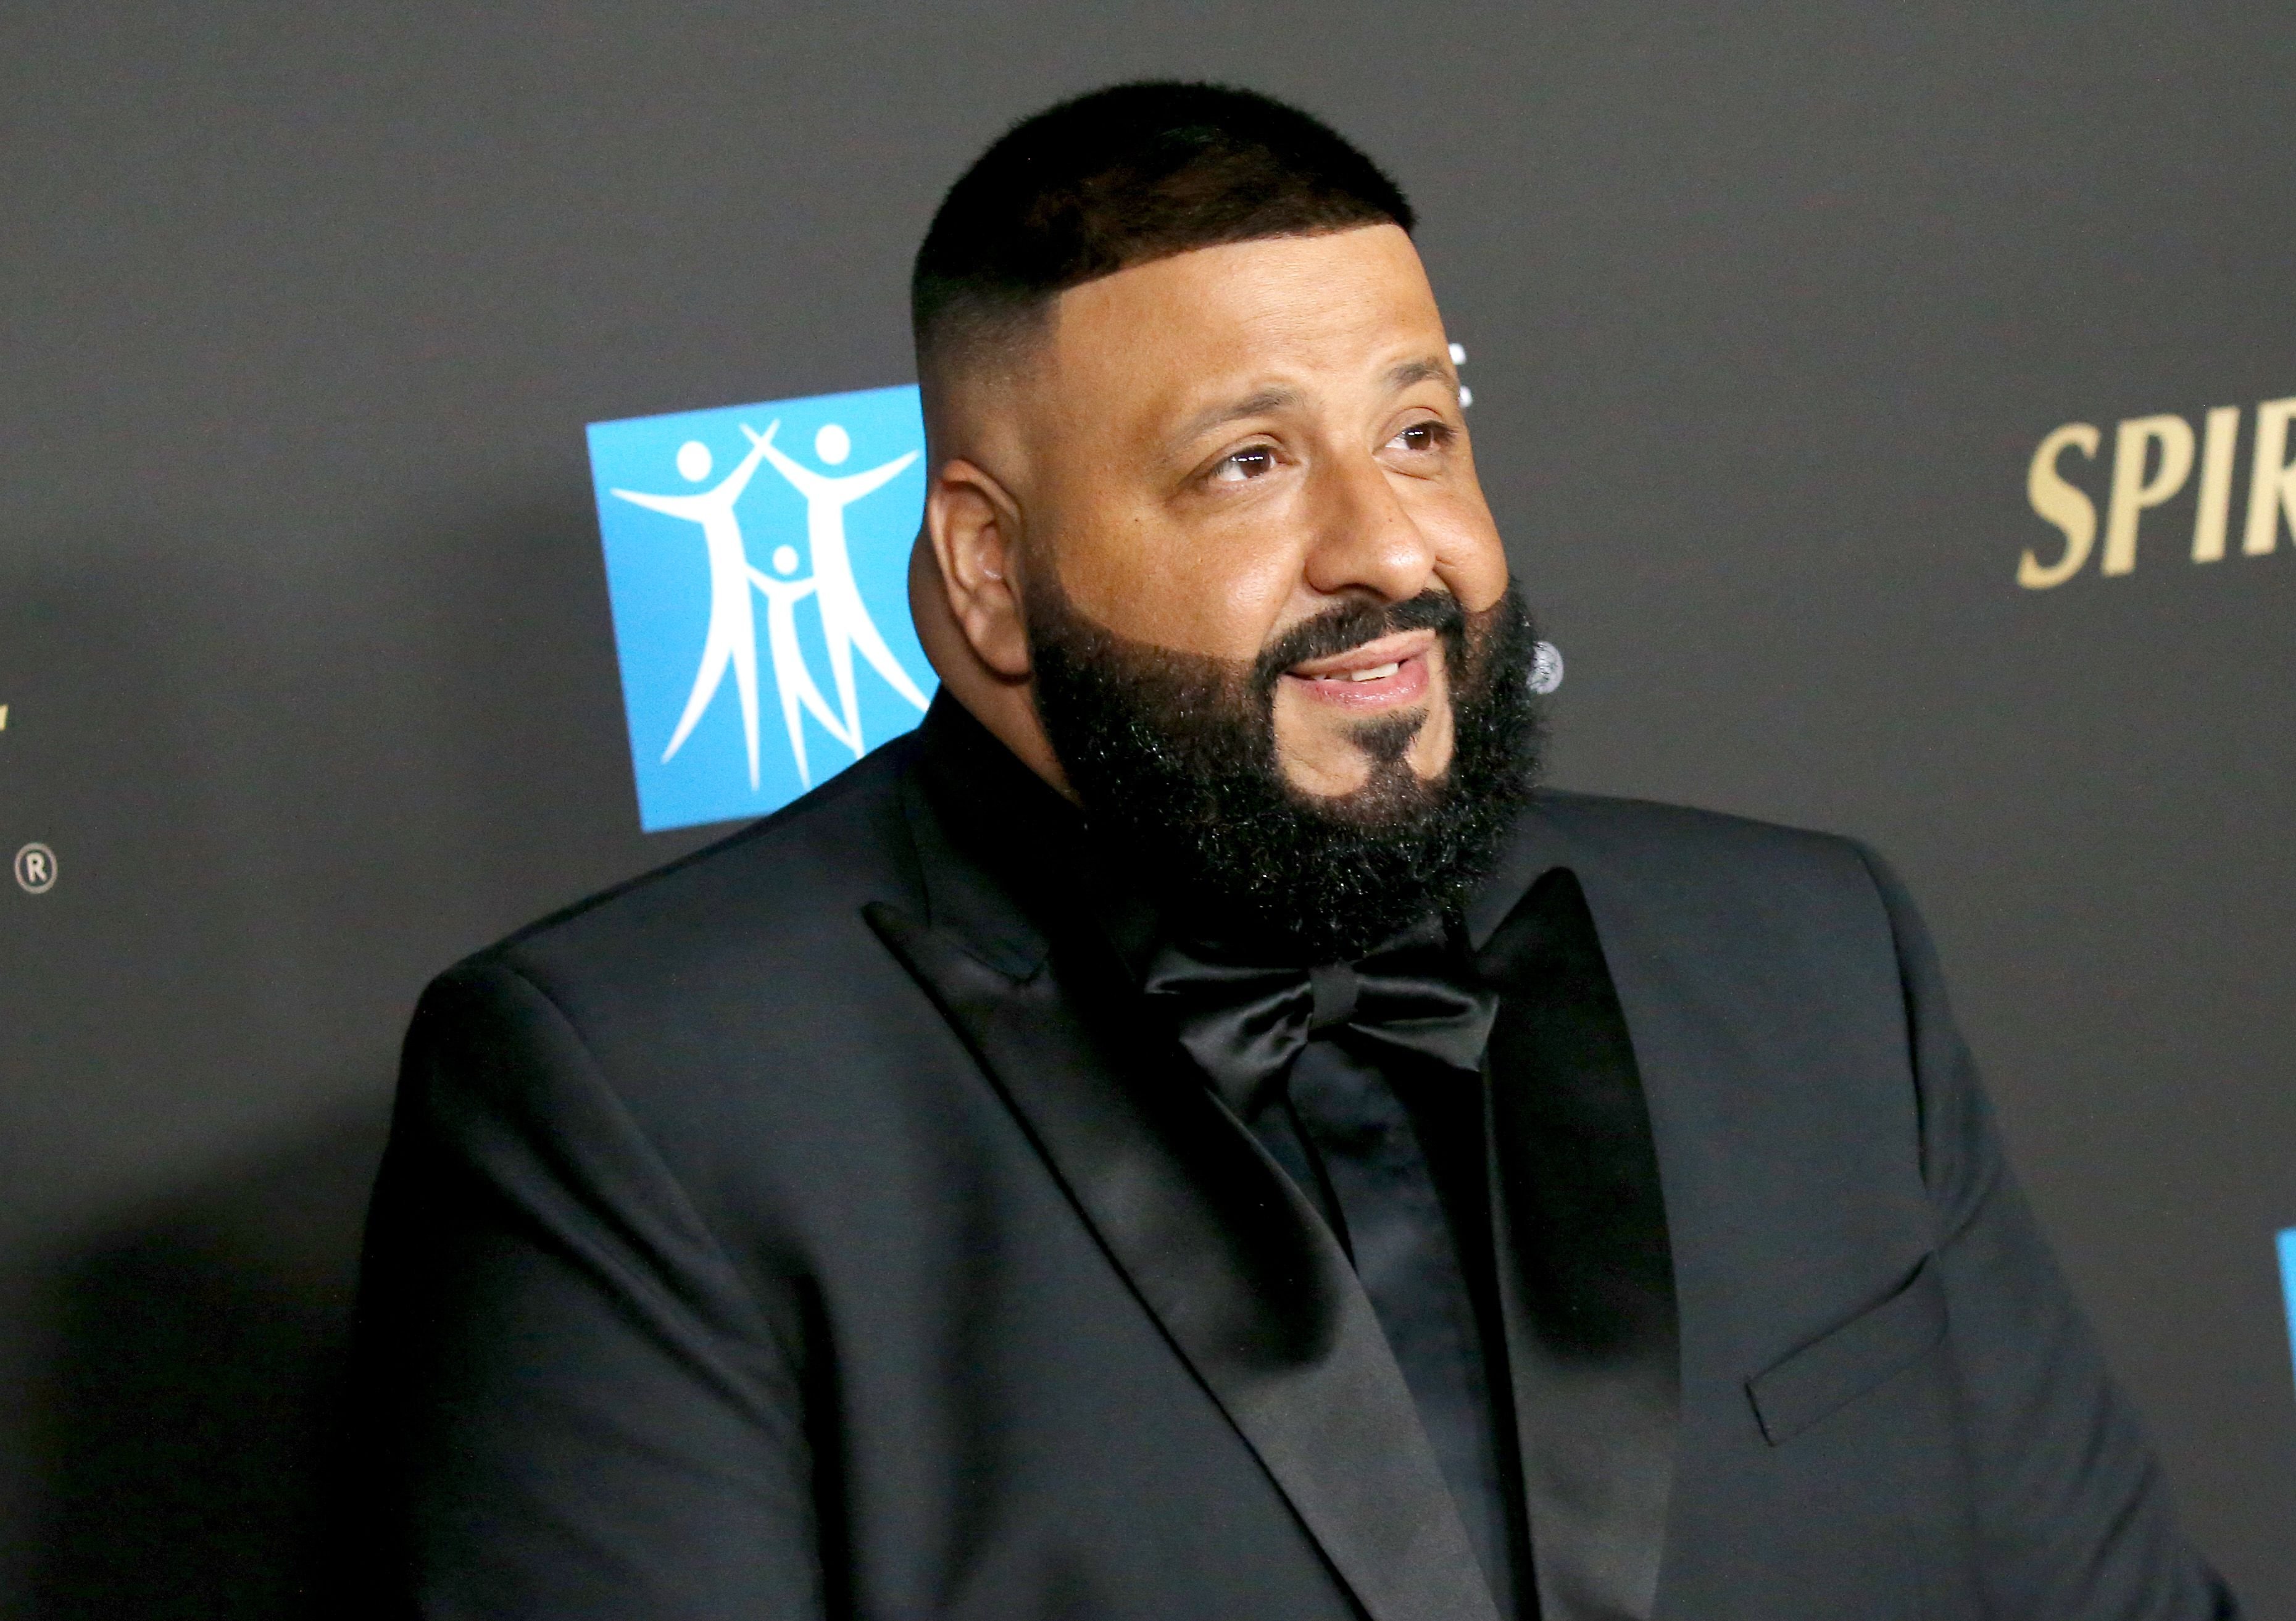 DJ Khaled at the City Of Hope's Spirit of Life 2019 Gala held at the Barker Hangar on October 10, 2019 | Photo: Getty Images